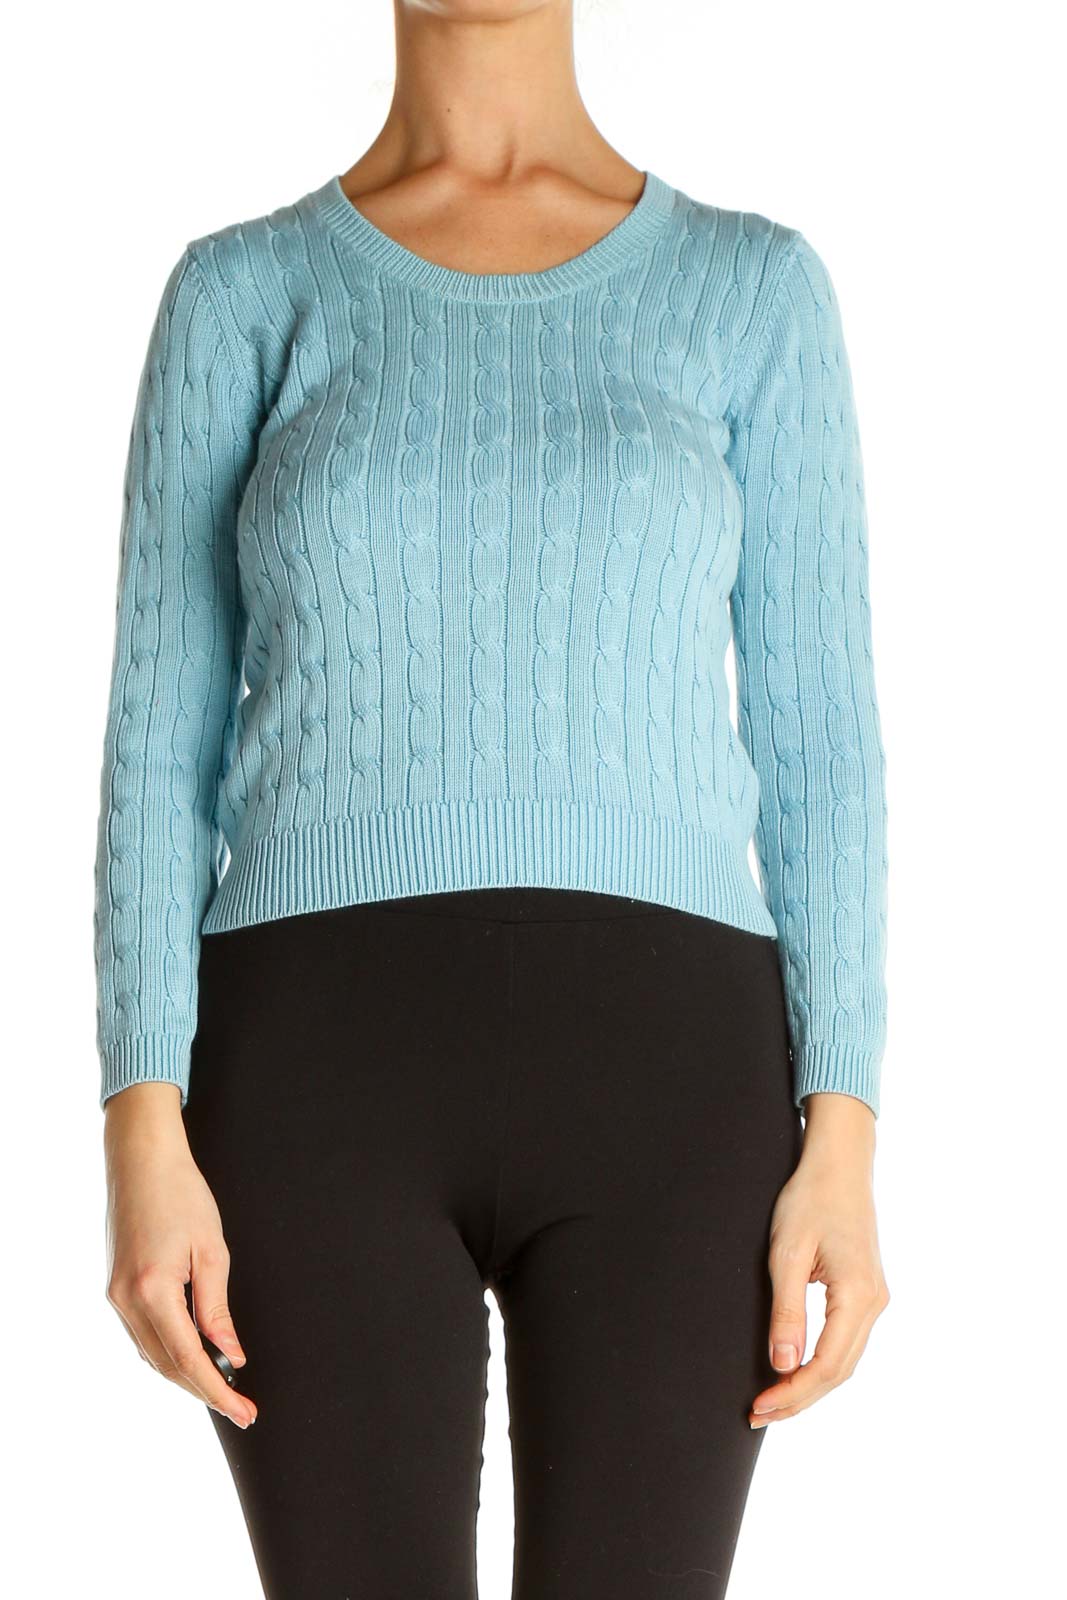 Blue Textured All Day Wear Sweater Front